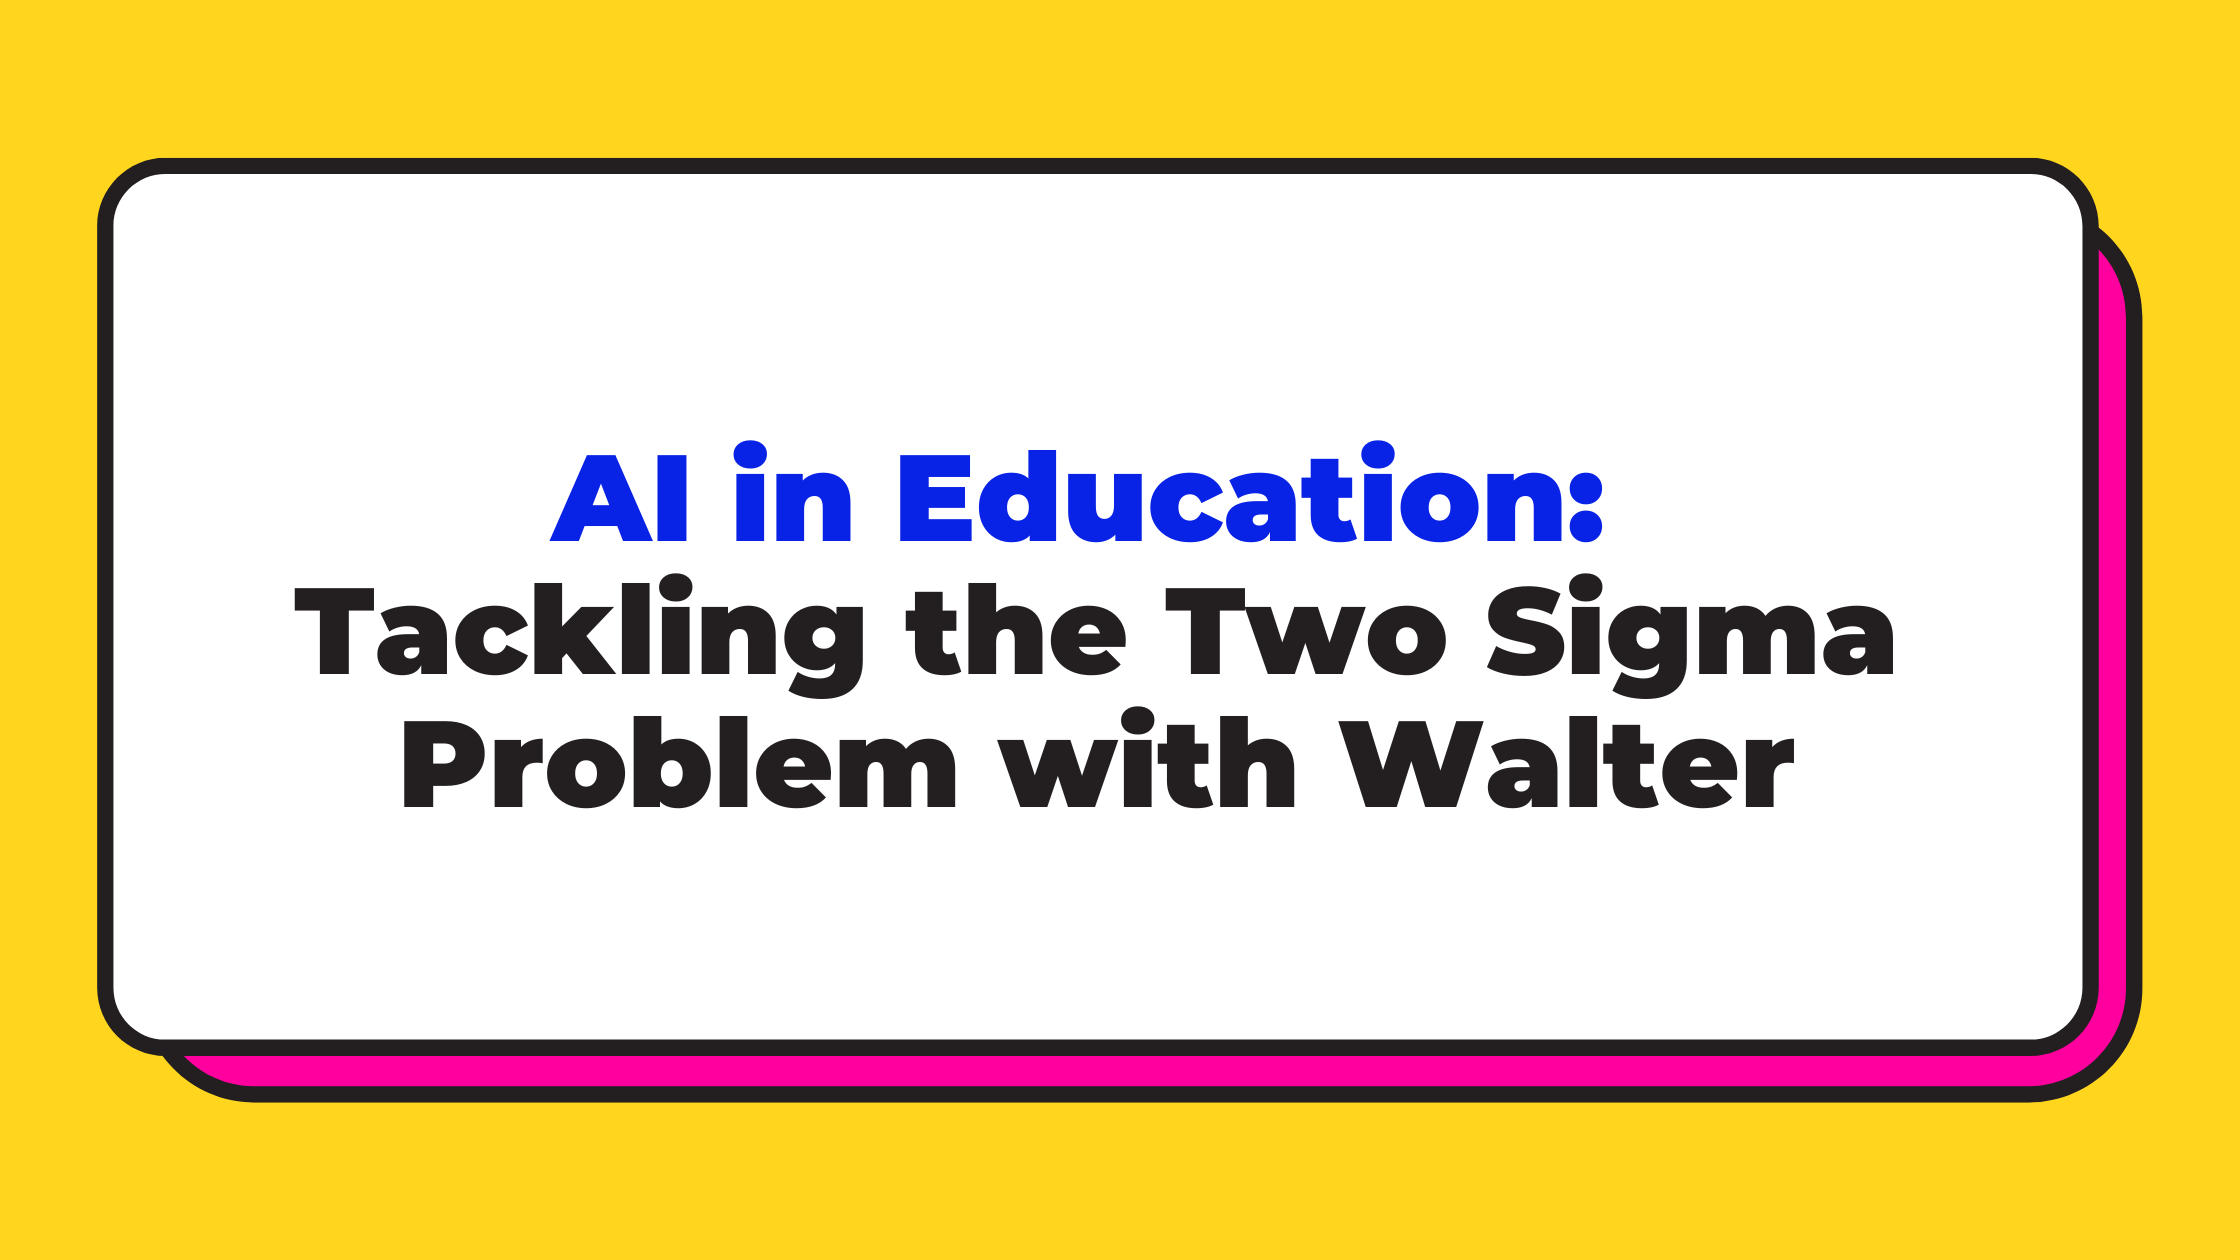 AI in Education: Tackling the Two Sigma Problem with Walter